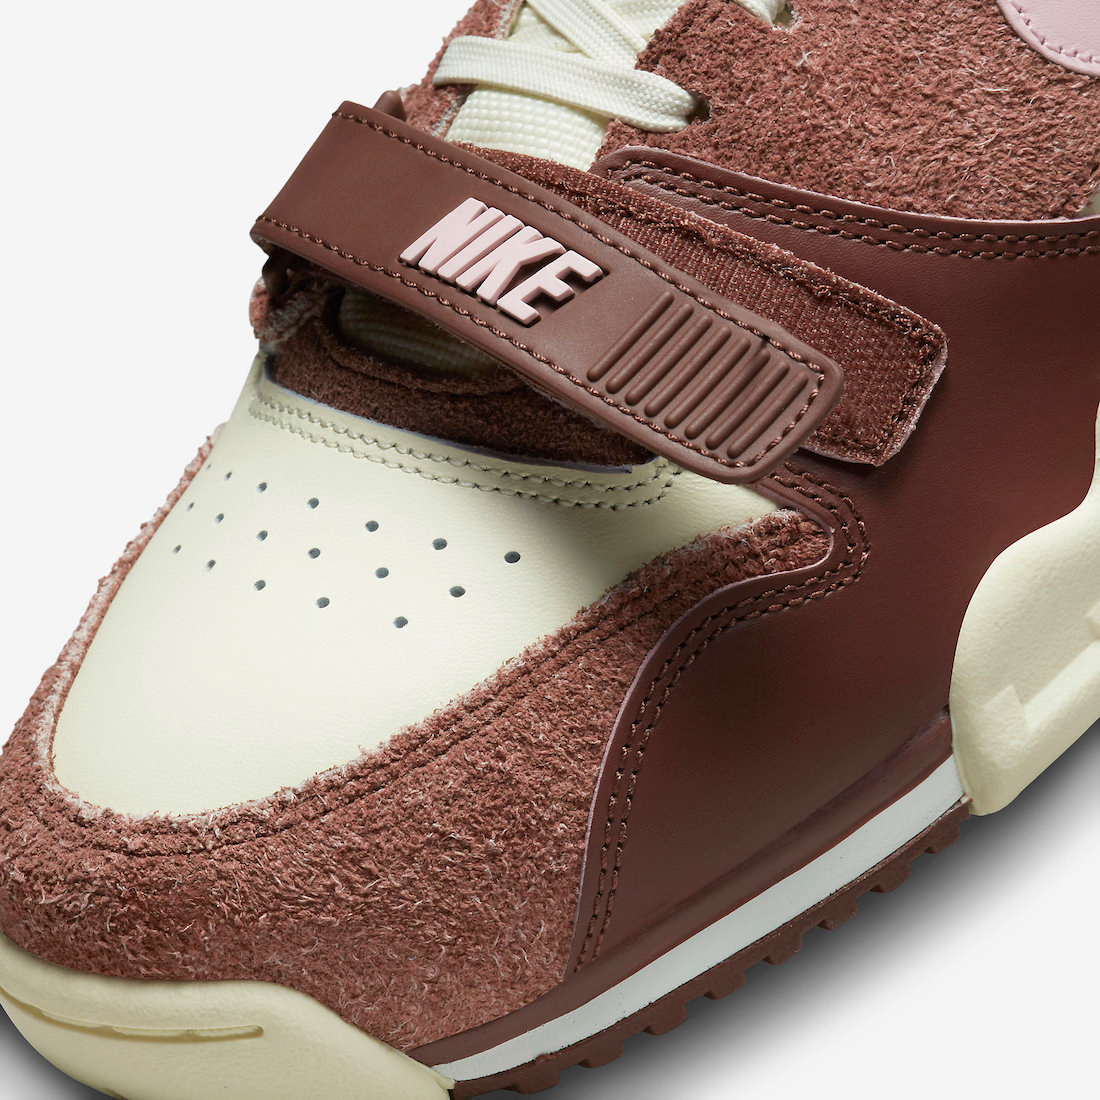 Nike-Air-Trainer-1-Valentines-Day-Release-Date-7